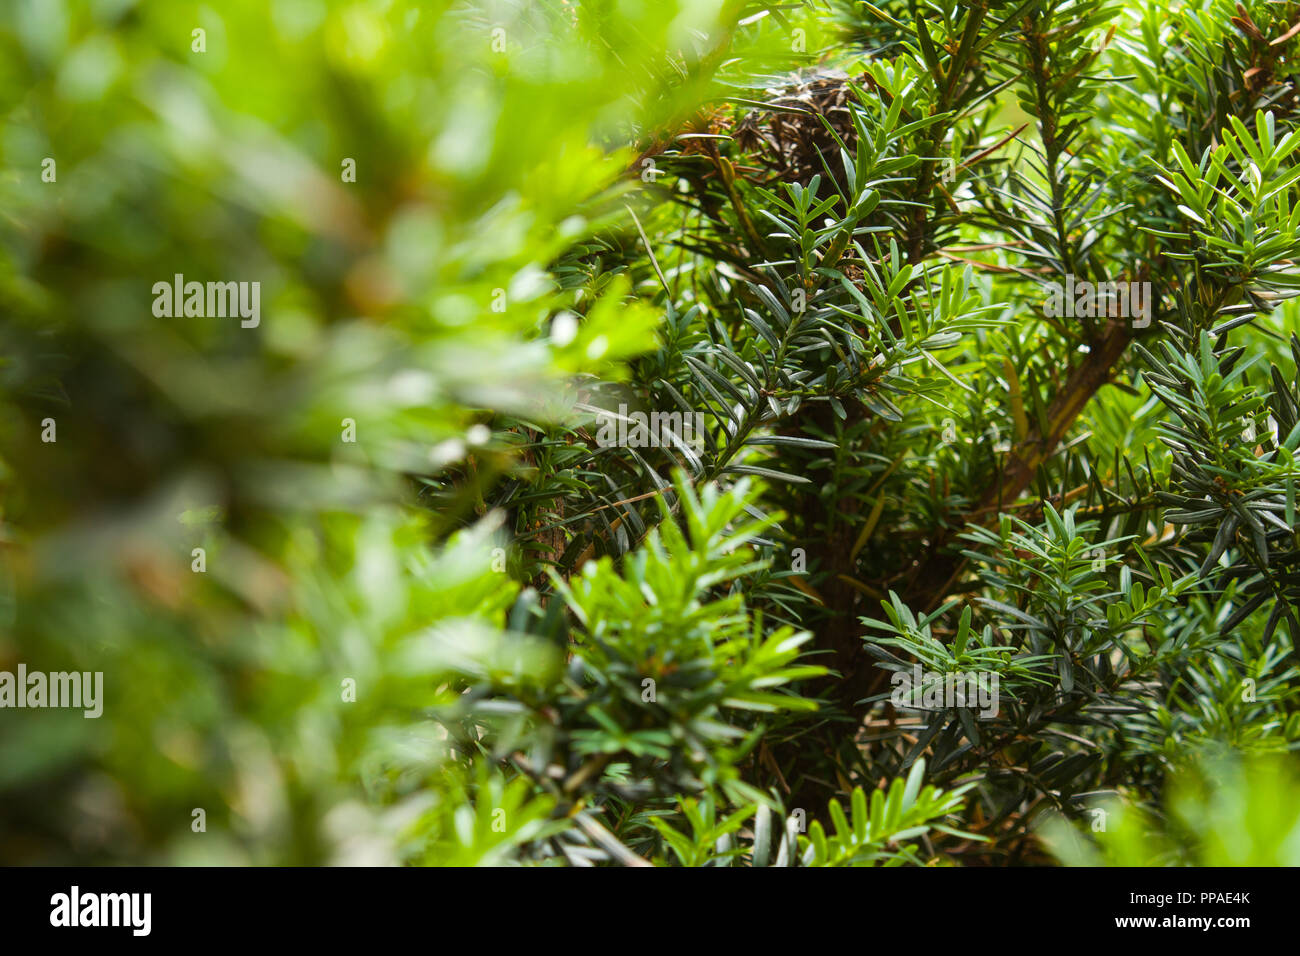 The green bush is close up. Blurry front background. Stock Photo